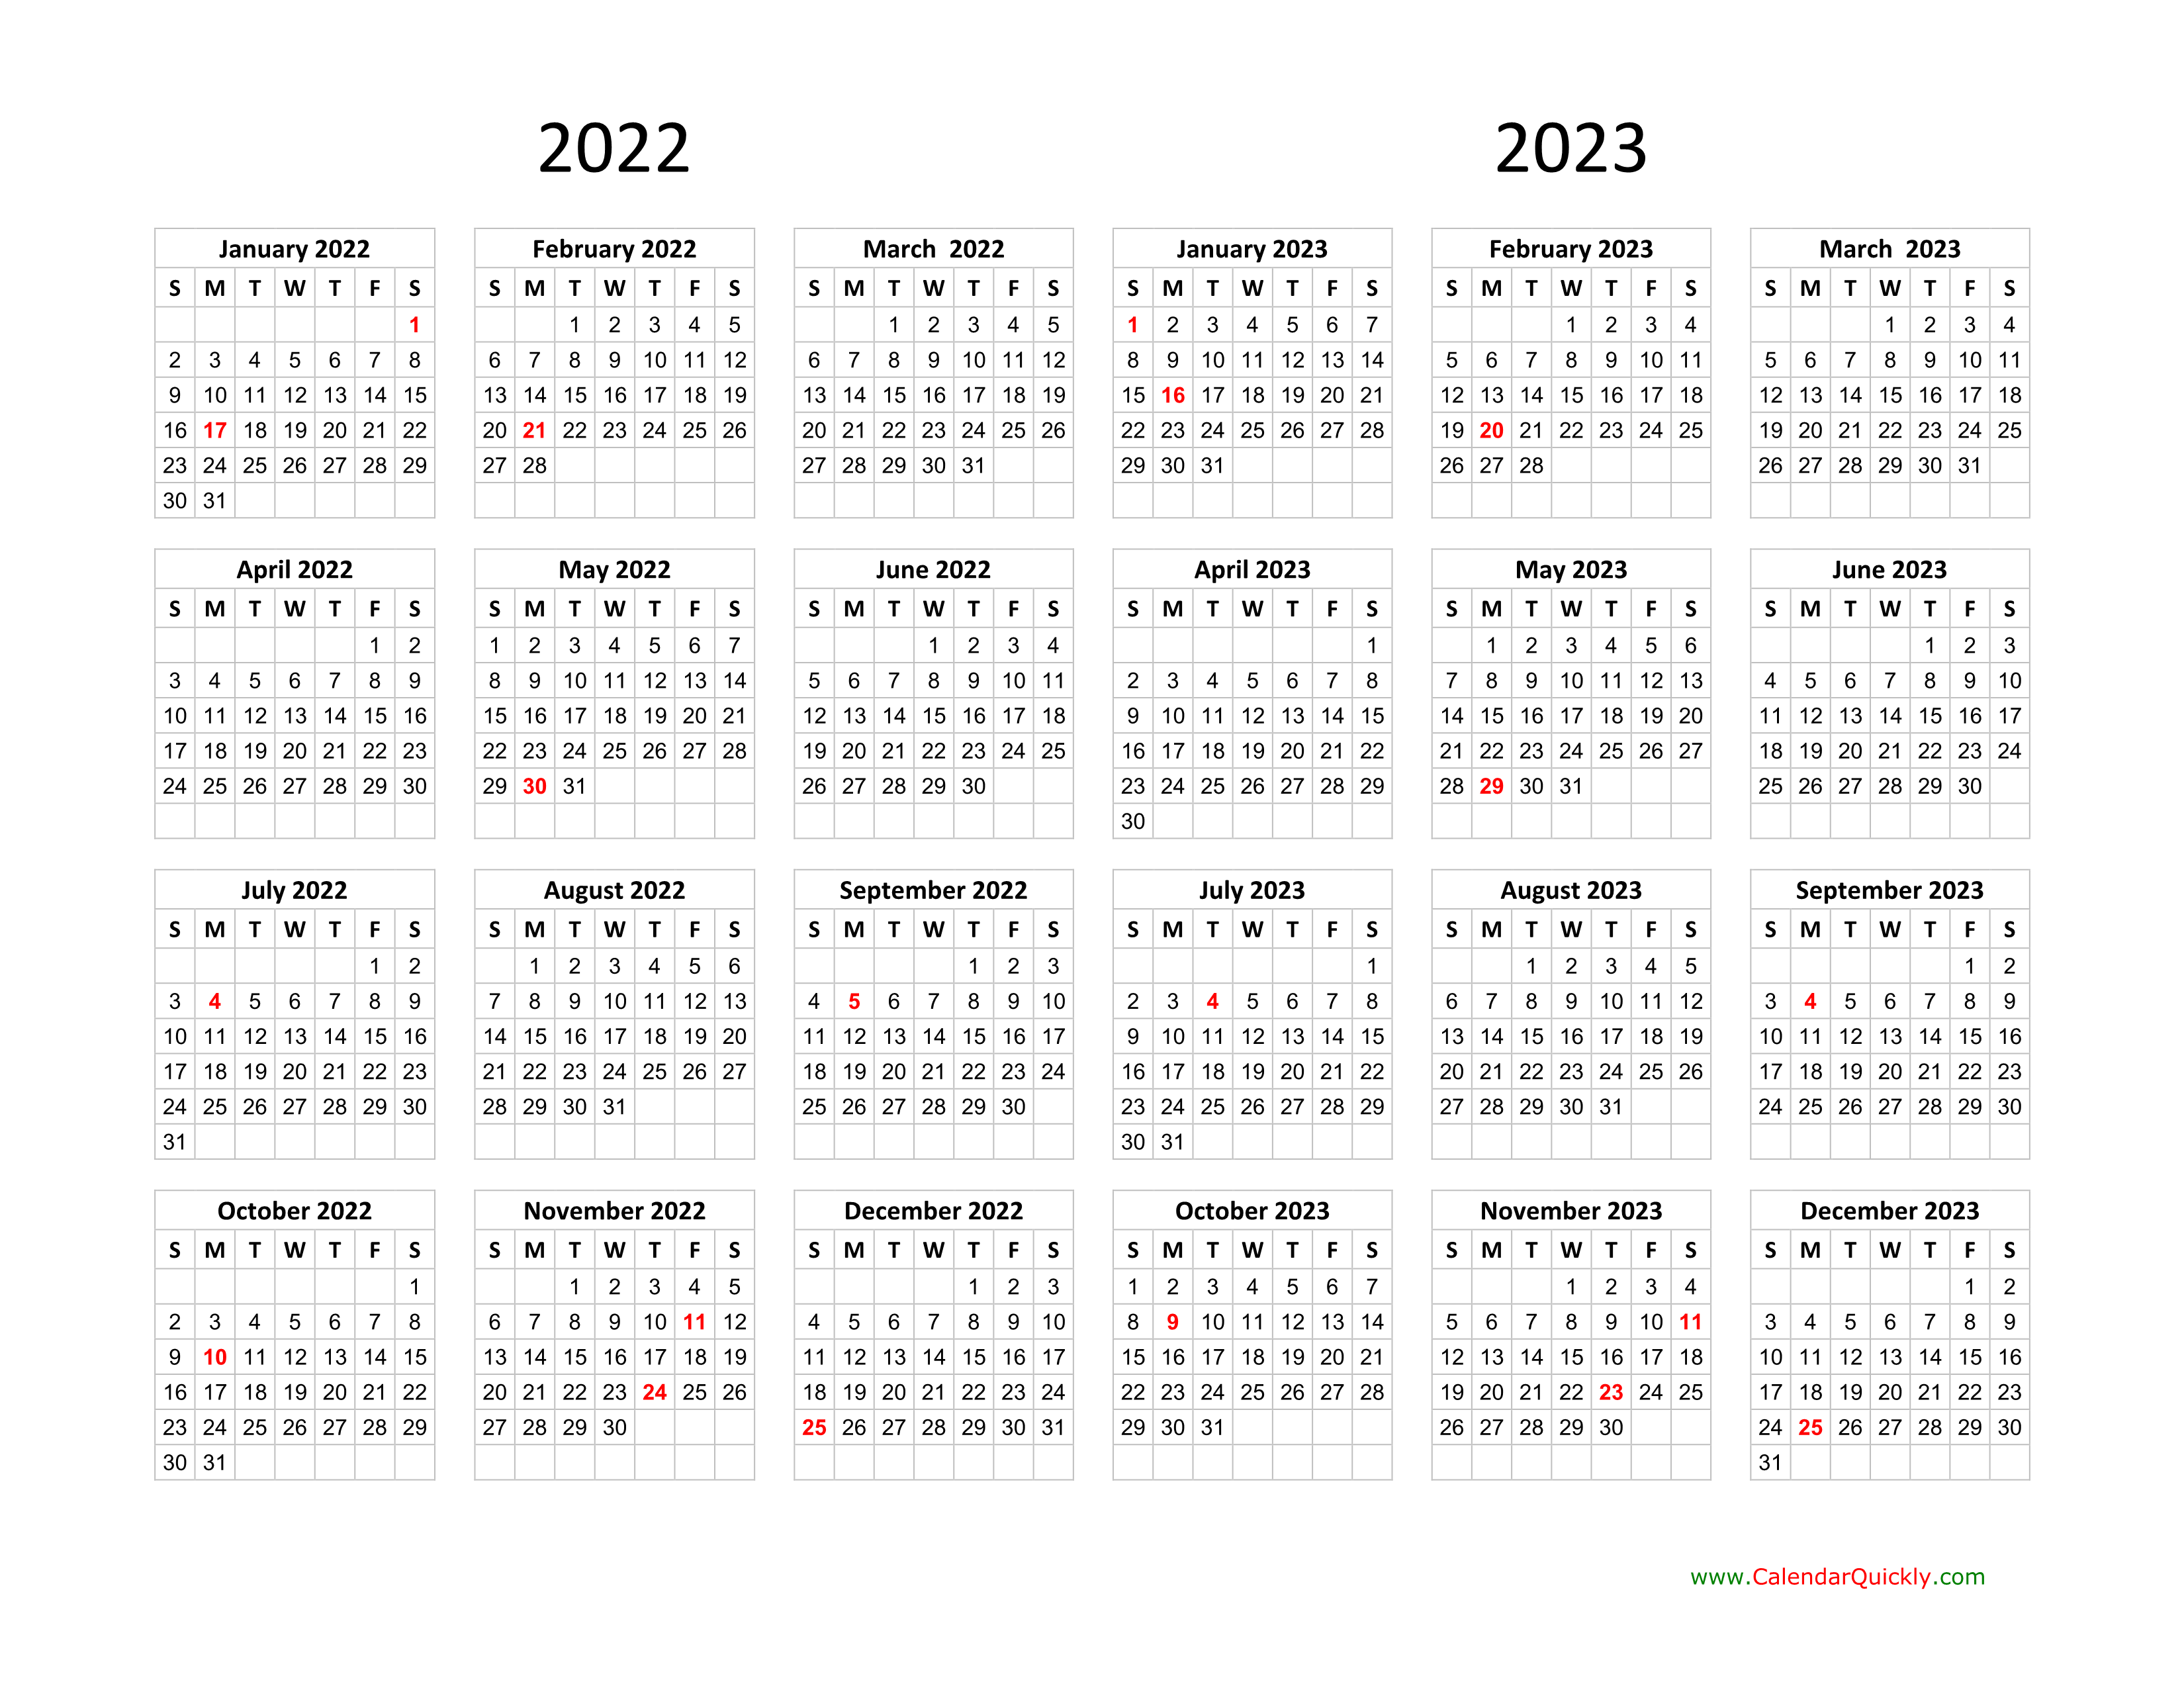 calendar-2022-and-2023-on-one-page-calendar-quickly